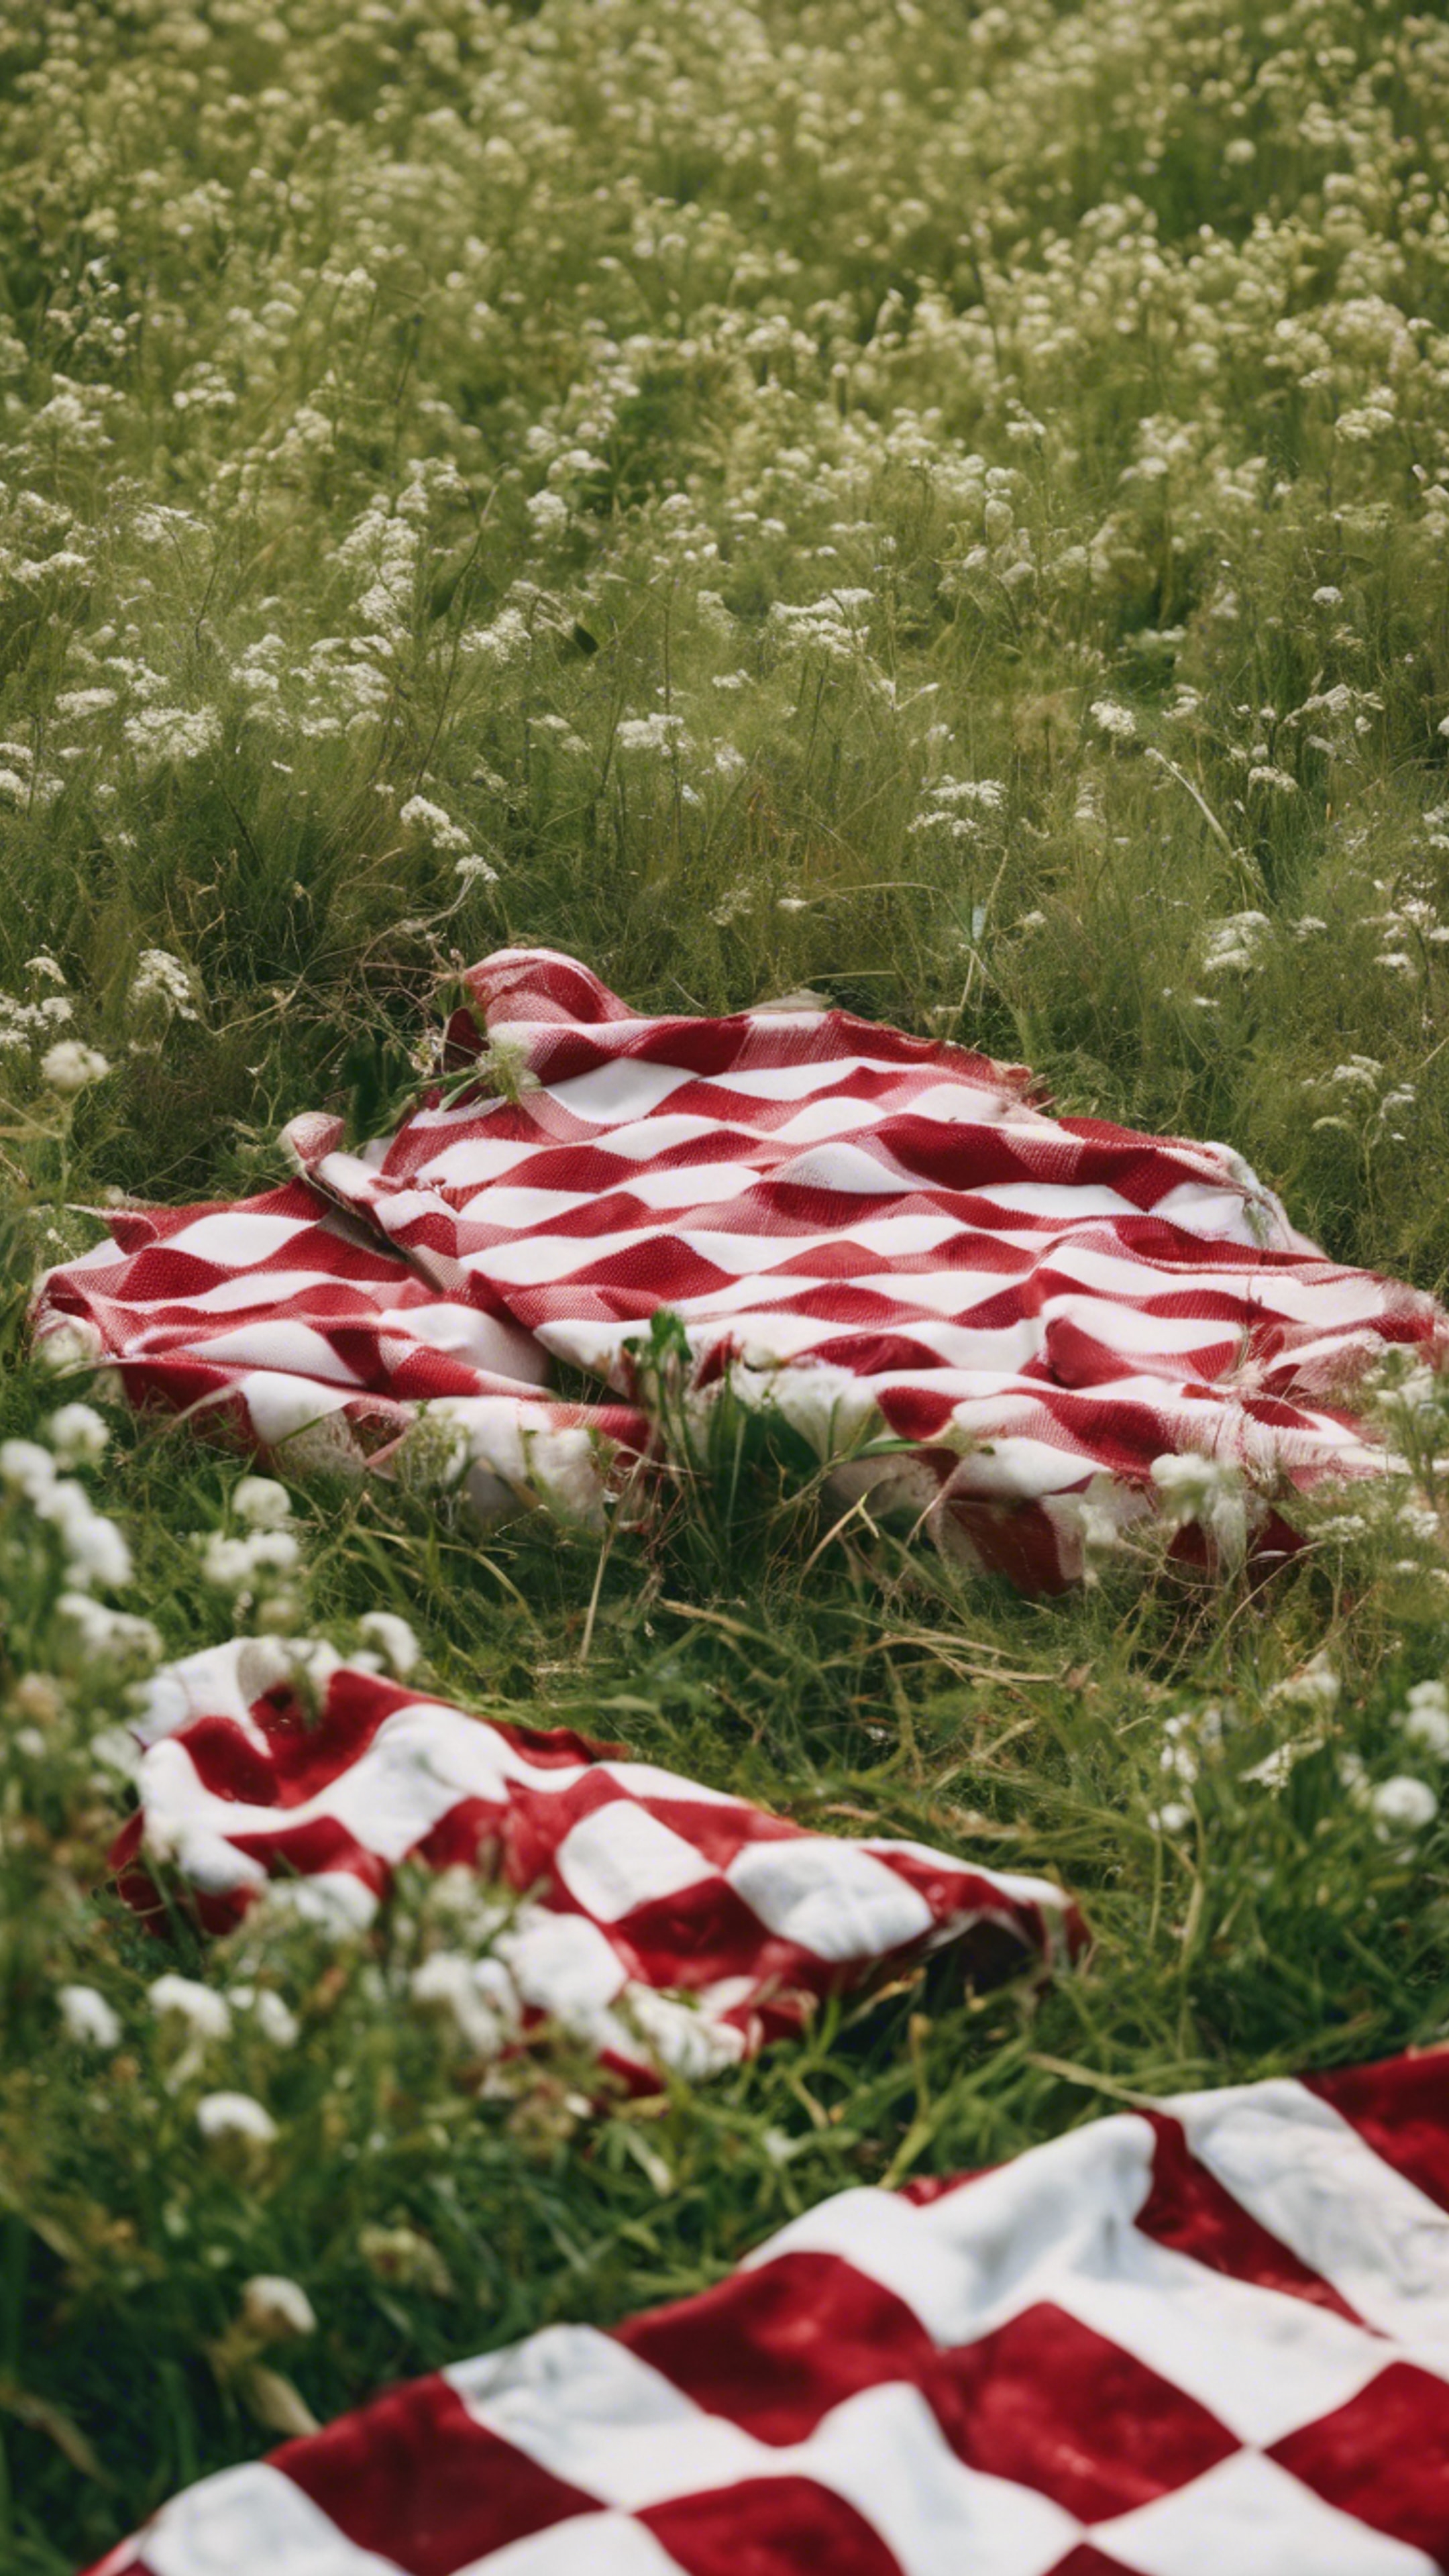 A red and white checkered picnic blanket spread out in a lush green field. Тапет[d3f97e971ed8445aa31d]